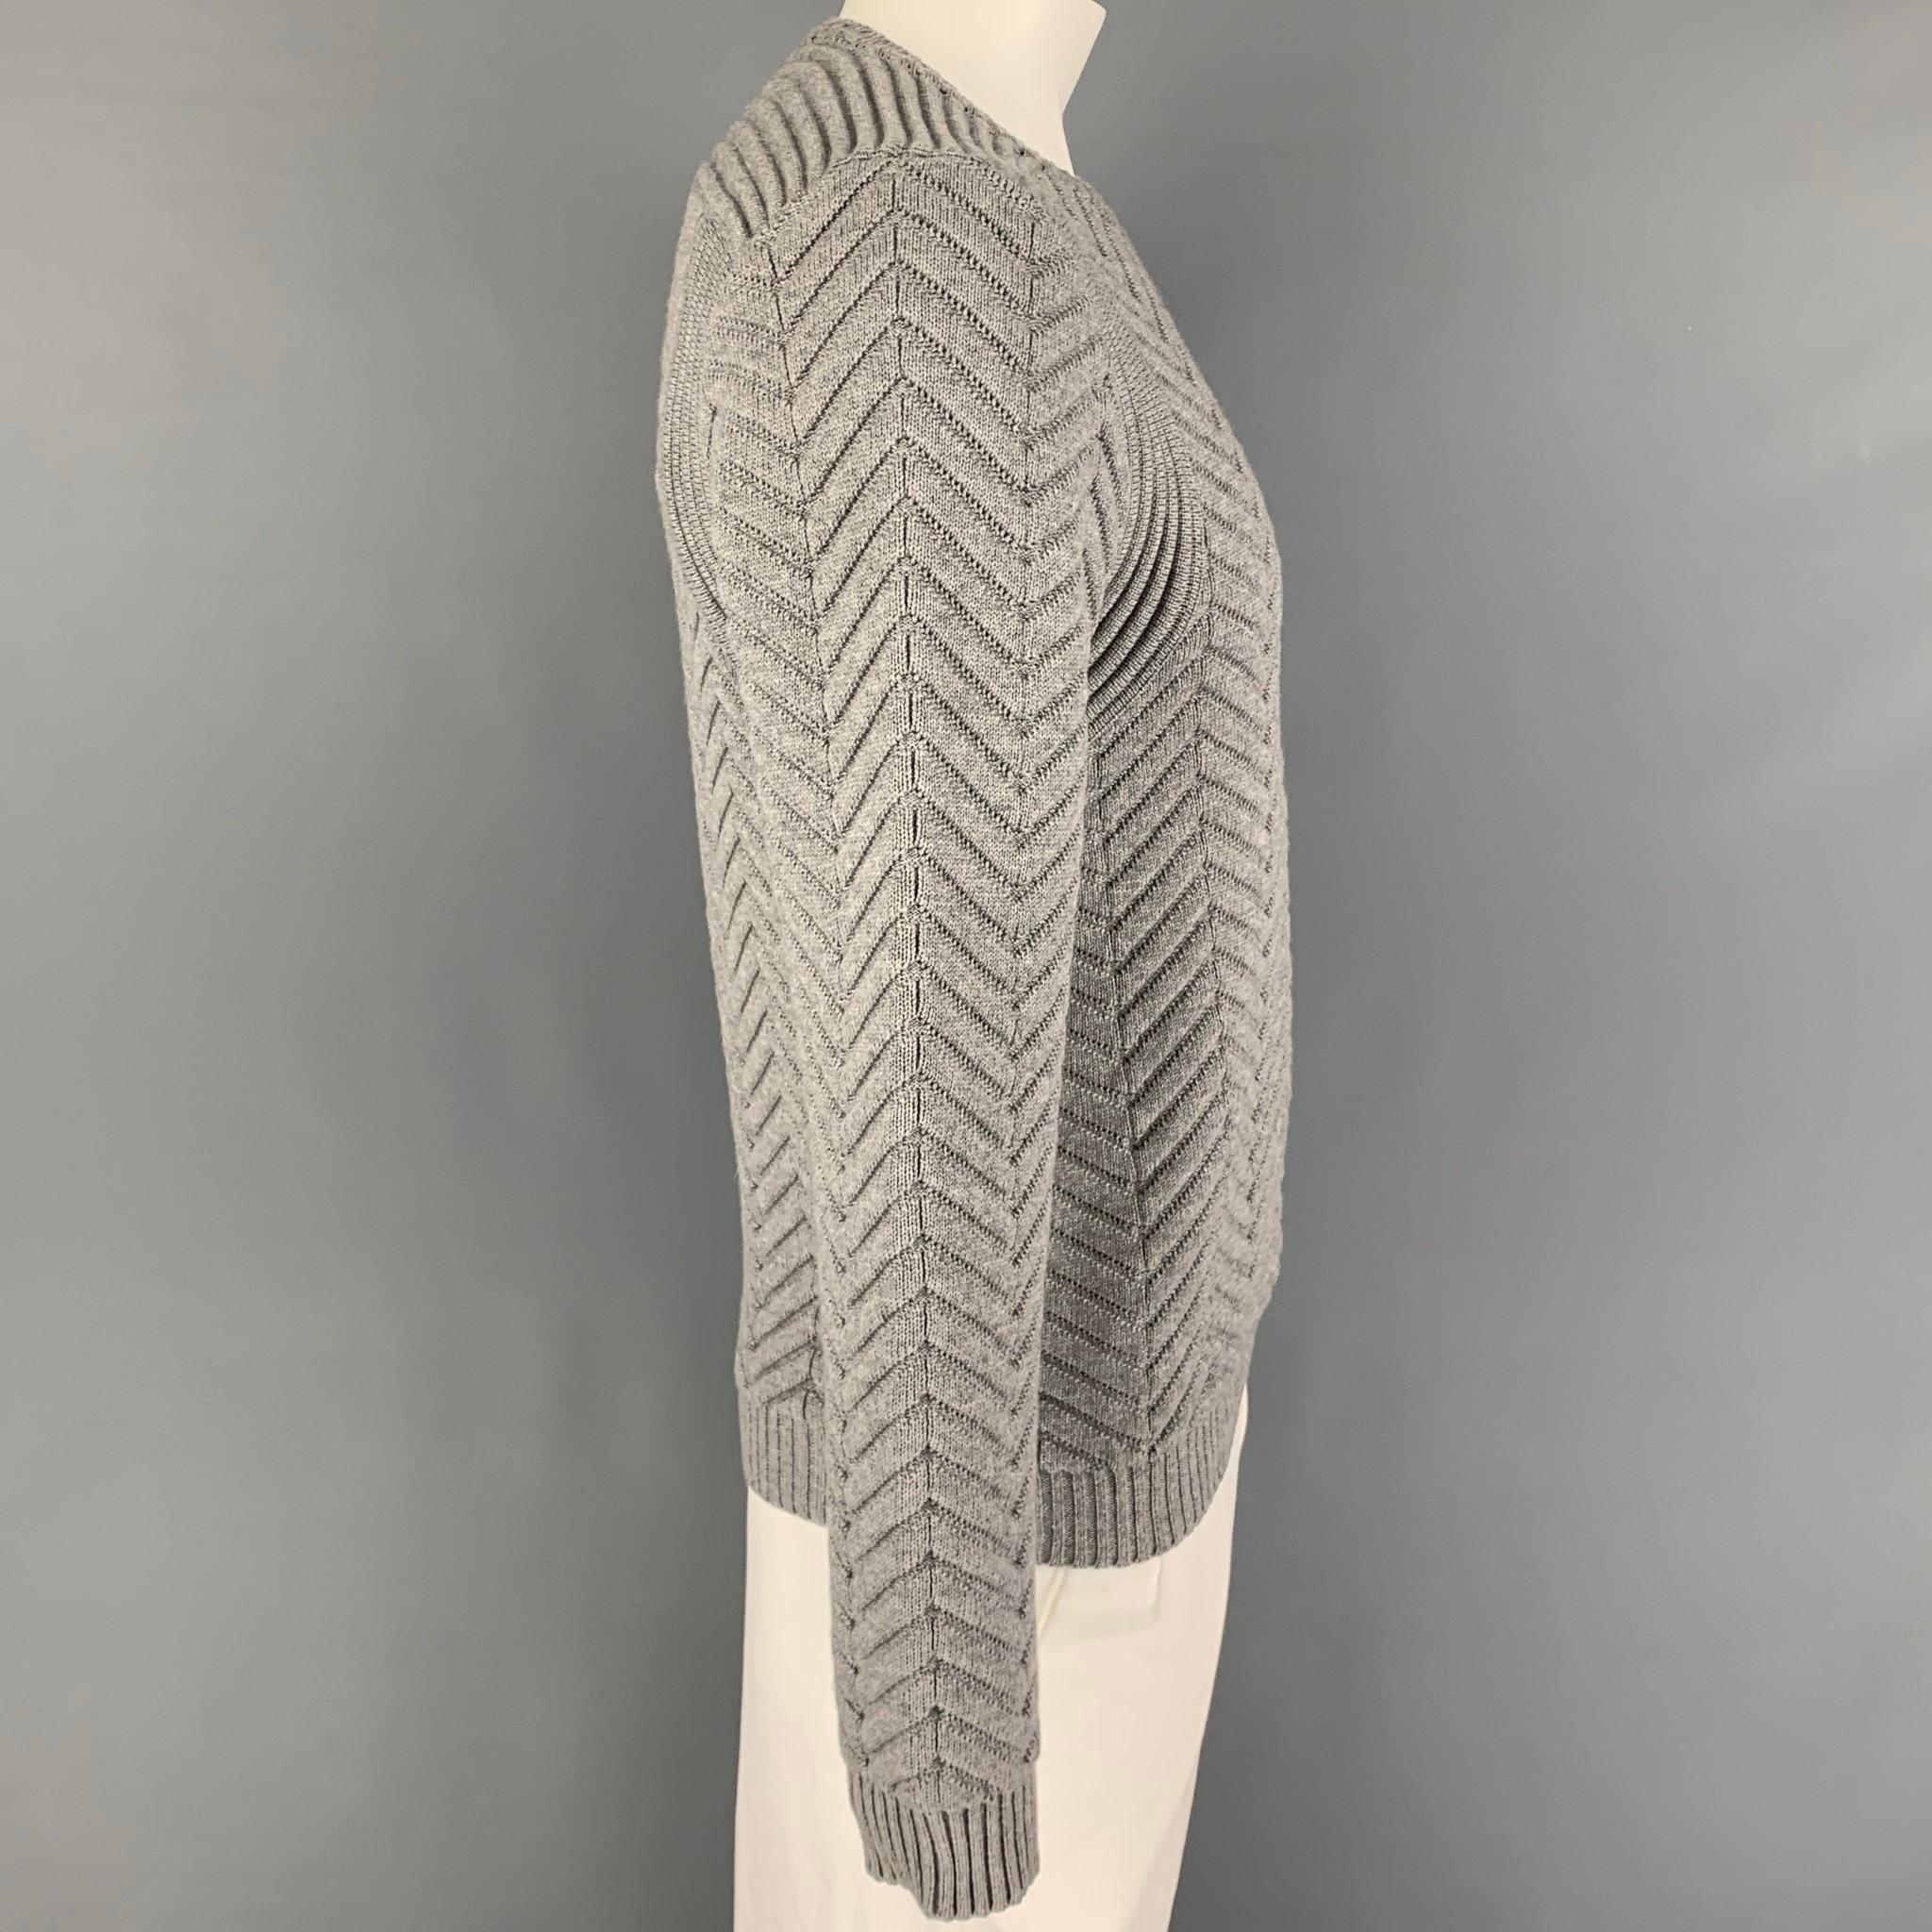 CALVIN KLEIN COLLECTION sweater comes in a grey chevron knitted material featuring a crew-neck. Made in Italy. 

Excellent Pre-Owned Condition.
Marked: L

Measurements:

Shoulder: 18.5 in.
Chest: 40 in.
Sleeve: 27 in.
Length: 26.5 in.